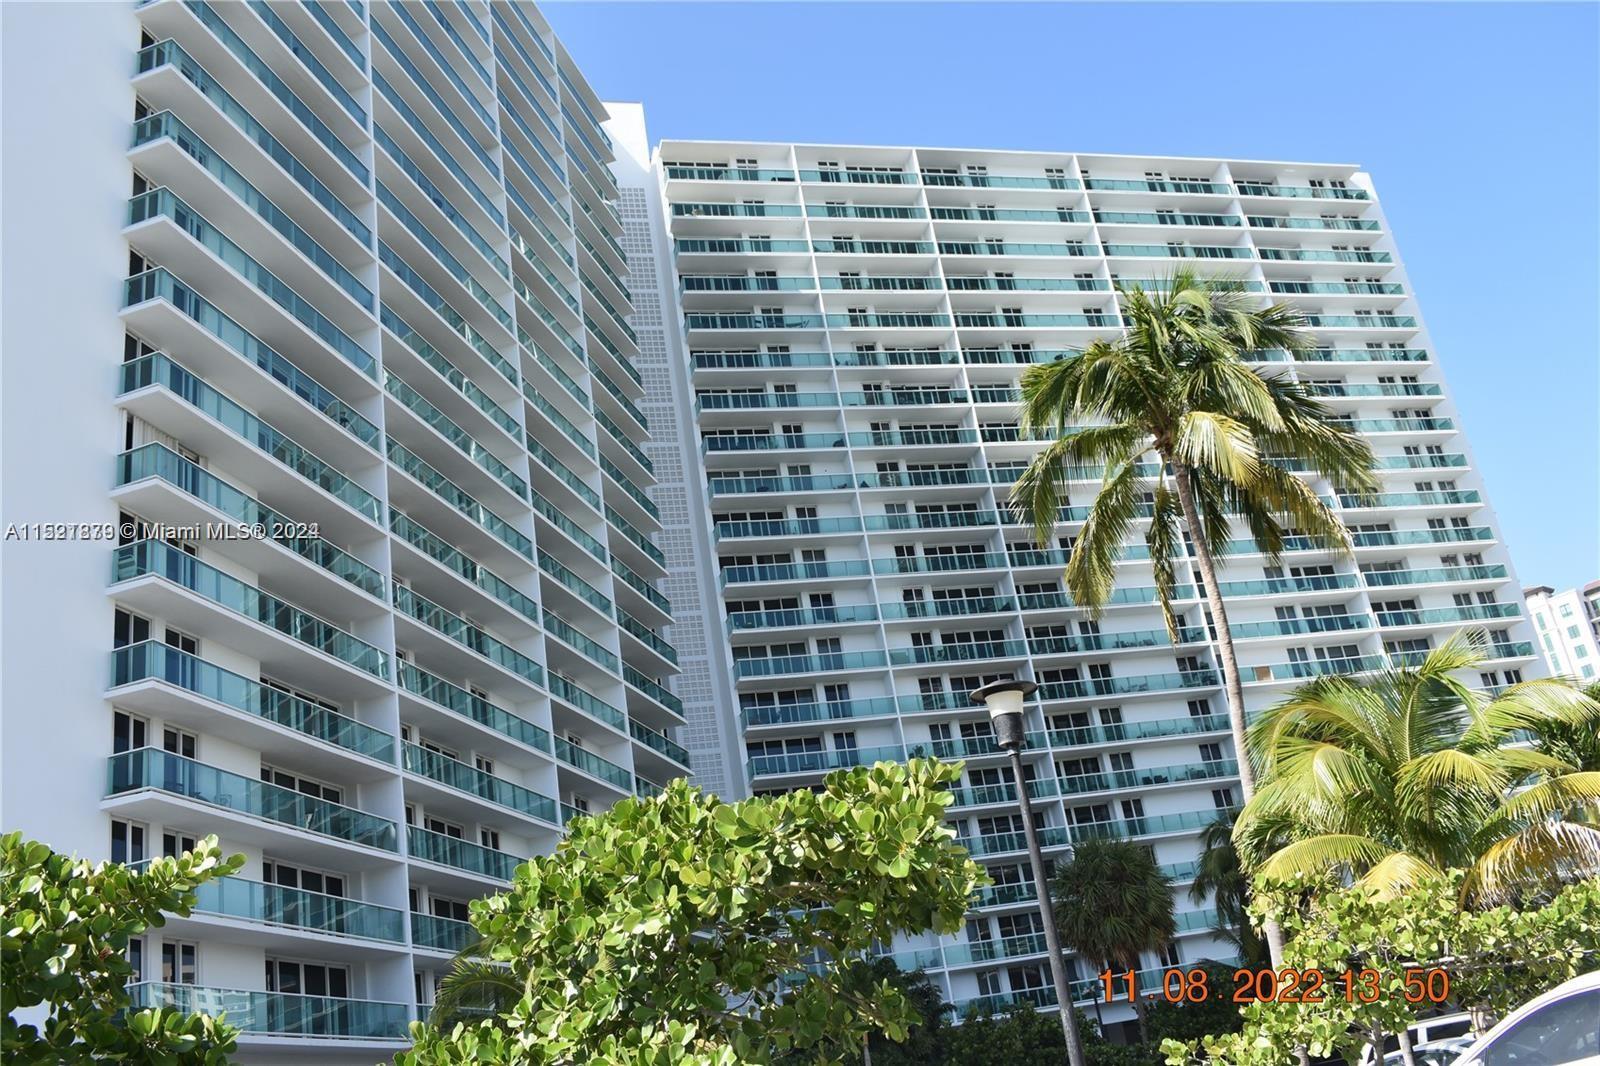 Photo of 100 Bayview Dr #309 in Sunny Isles Beach, FL